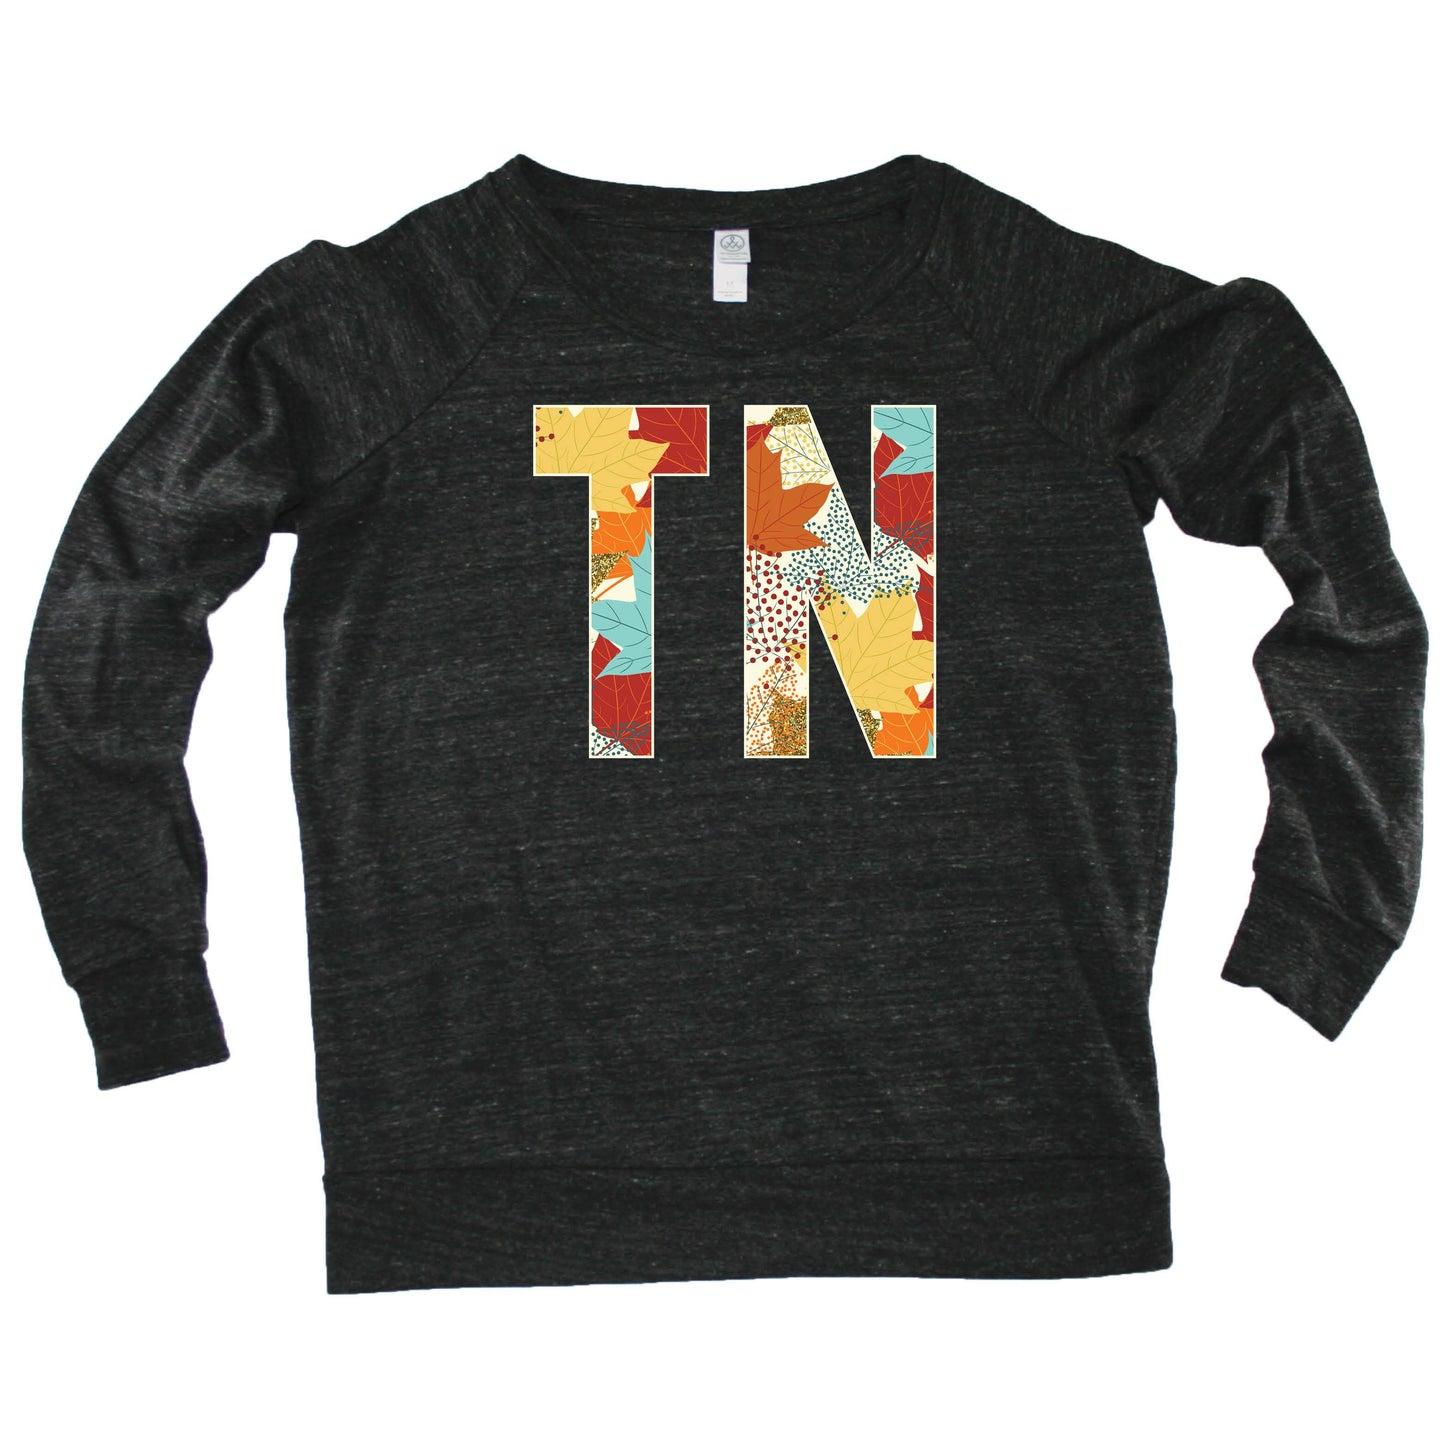 Tennessee Fall Foliage - Slouchy Top